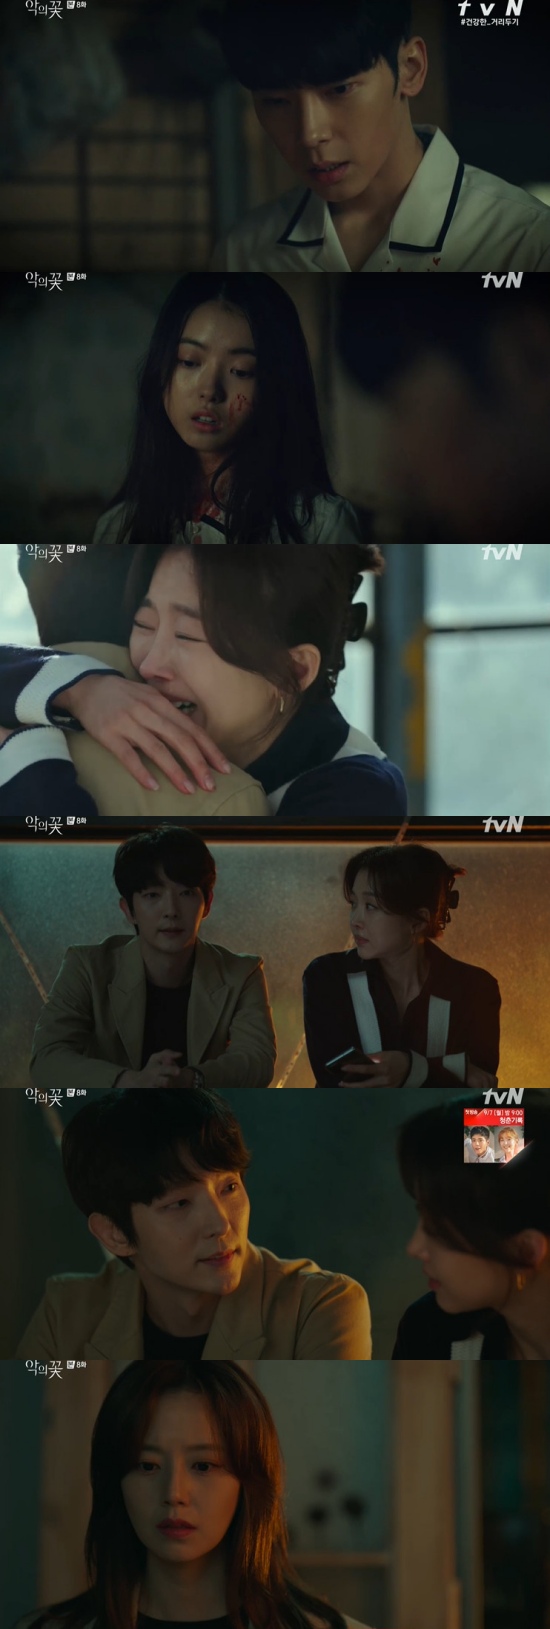 Flower of Evil Lee Joon-gi and Moon Chae-won each started looking for Choi Byung-mos Accomplice.In the 8th episode of TVNs Drama Flower of Evil, which was broadcast on the 20th, Baek Hee-seong (Lee Joon-gi) was portrayed as Do Hae-soo (Jang Hee-jin) and The Slap to find Accomplice of Choi Byung-mo.On this day, Baek Hee-seong convinced him that Do Hae-su had met Accomplice in the former The Funeral chapter of his father Do Min-seok.Park Kyongchun (Yoon Byung-hee) had previously assumed that Baek Hee-seong was an Accomplice of the Dominite because he had a pendant of Jung Mi-sook.Eventually, Baek Hee-seong tried to find Dohasu and The Slap to find Accomplice; Baek Hee-seong said, I never tried to find it, but I have a problem.I need your help.My sister met someone at the time of my father The Funeral, and Do Hae-su hugged him with tears before the end of the Baek Hee-seong.In the process, it was revealed that Baek Hee-seong was identified as the true crime of the Murder case and had to escape.In the past, Lee tried to molest young Do Hae-soo (Im Na-young), and Do Hae-soo committed Murder to prevent it.At that time, the young Do Hyun-soo (Park Hyun-joon) buried his blood in his body to take the sins instead of Do Hae-su, and nailed him, saying, I live as normal as my sister, Im not, so Im fine.In particular, Baek Hee-seong showed affection to Do Hae-su by showing pictures of car support and back Eunha (Eung Seo-yeon), and Do Hae-soo was delighted, saying, Hyun-soo, you have changed a lot.At this time, the car support followed the Baek Hee-seong using the GPS mounted on the clock, and was listening to the conversation between the two.Do Hyun-soo is not Accomplice. He was also relieved that he had a deal with Park Kyoungchun.In addition, Dohasu later realized that the car support was a police officer who had come to him because of the Park Kyoungchun incident; Baek Hee-Seong said, Yes, its the police.I was on the Park Kyoungchun case. Im still a little ice-cold. You cant make a mistake. Its okay. Youre never making a mistake.I will live in Baek Hee-seong until the end, he explained, and Do Hae-soo asked, Do you love him? But Baek Hee-seong said: No, I never thought of it that way for a single moment.I do not know that mind, he denied, and the car support turned to Baek Hee-seong with disappointment.That night, Carson confirmed to Baek Hee-seong, Do you love me? and Baek Hee-seong smiled, What do you ask me?Carson is living to the end with Baek Hee-seong. For Eunha. Baek Hee-seong and carson who knows nothing. Lets break up like that.Its the last gift I give you, he thought.After that, Carson started a re-investigation of the Murder case when playing with the team members.Baek Hee-seong also tracked down the past with Kim Moo-jin (Seo Hyun-woo) and Do Hae-su to find Accomplice.In the meantime, the real Baek Hee-Seong (Kim Ji-hoon) regained consciousness, raising the tension of the drama.Photo = TVN broadcast screen